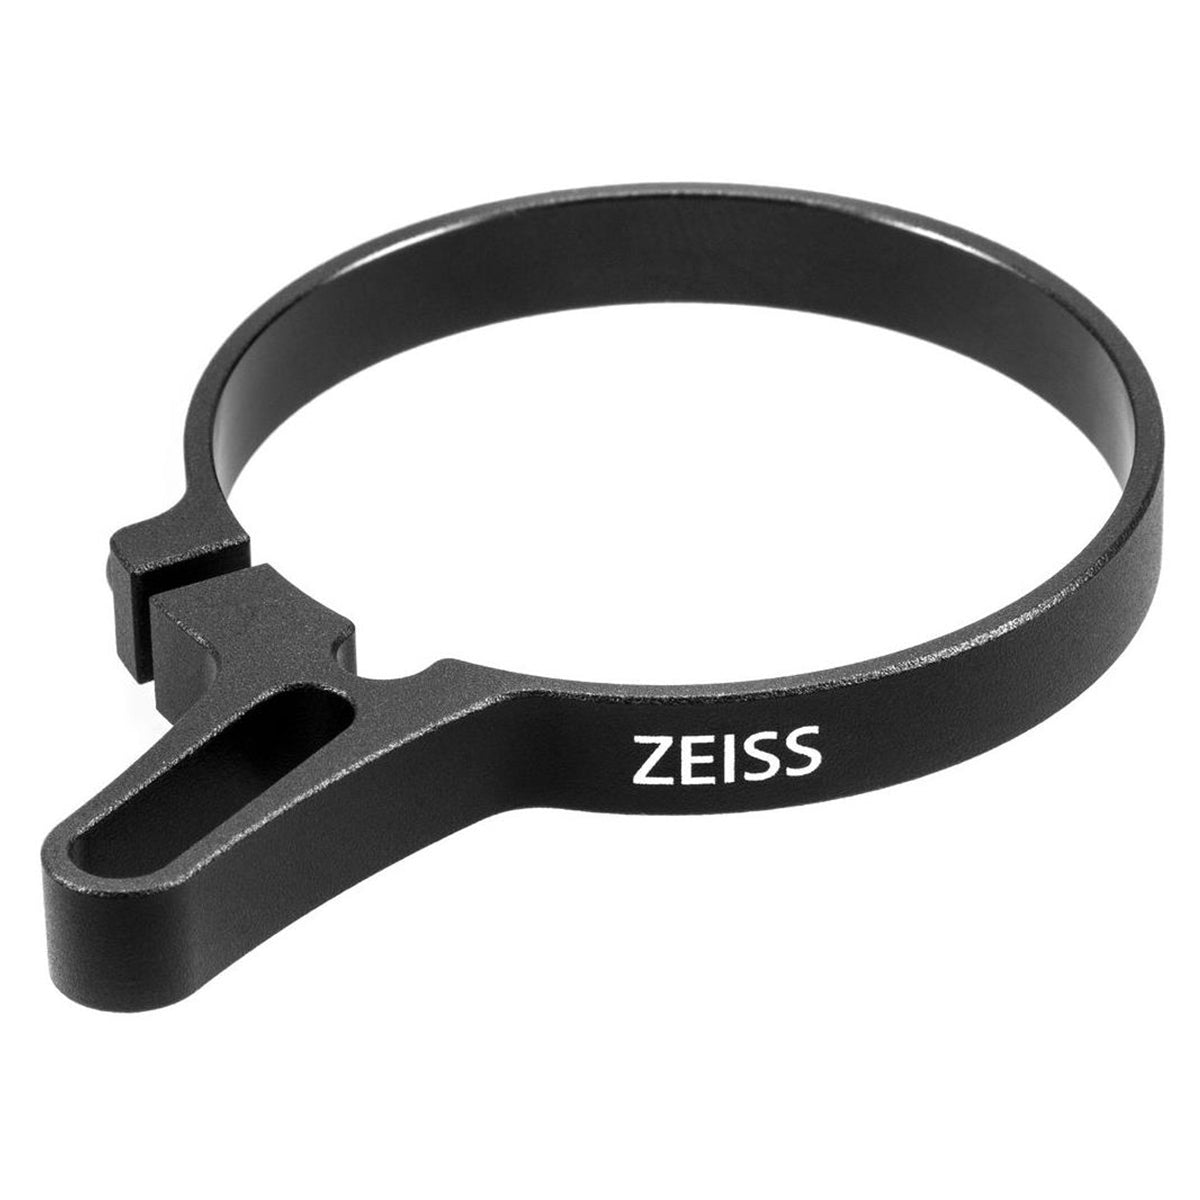 Zeiss Conquest V4 Throw Lever in Zeiss Conquest V4 Throw Lever by Zeiss | Optics - goHUNT Shop by GOHUNT | Zeiss - GOHUNT Shop